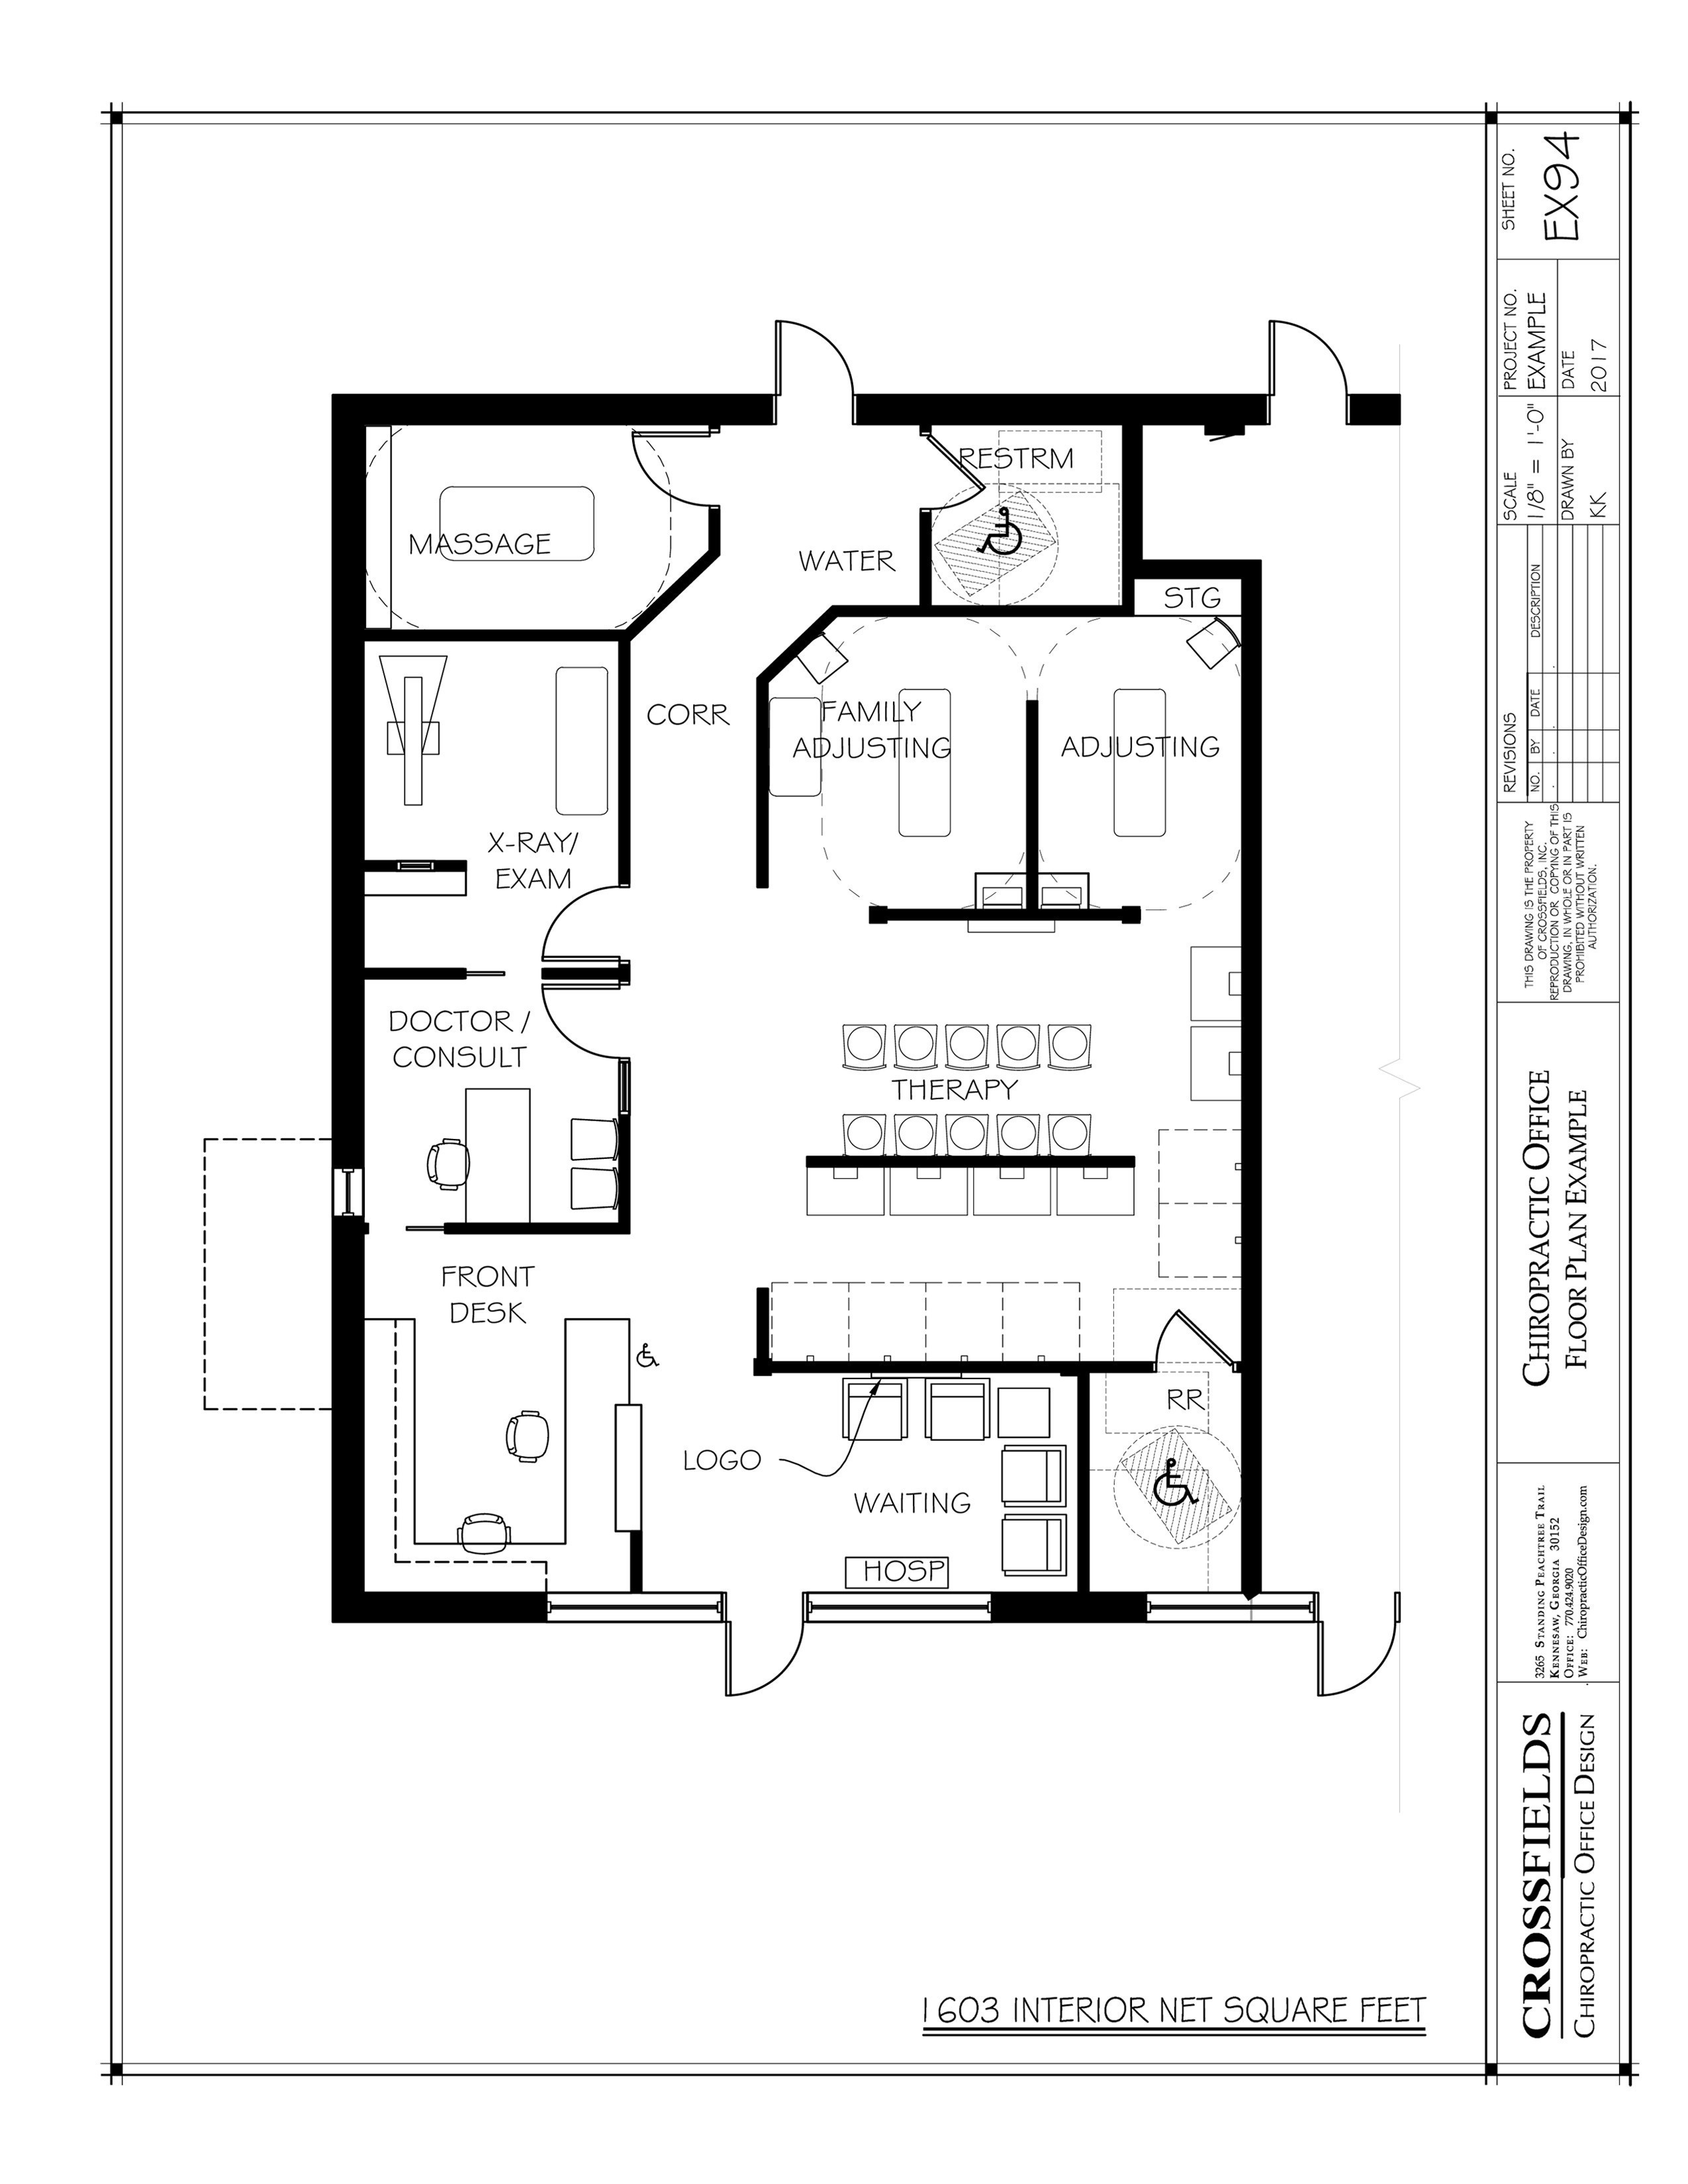 28 Awesome Hardwood Floor Wax Lowes 2024 free download hardwood floor wax lowes of home floor plan designer unique lowes home plans draw your floor regarding home floor plan designer unique floor plan blueprints elegant mansions floor plans free